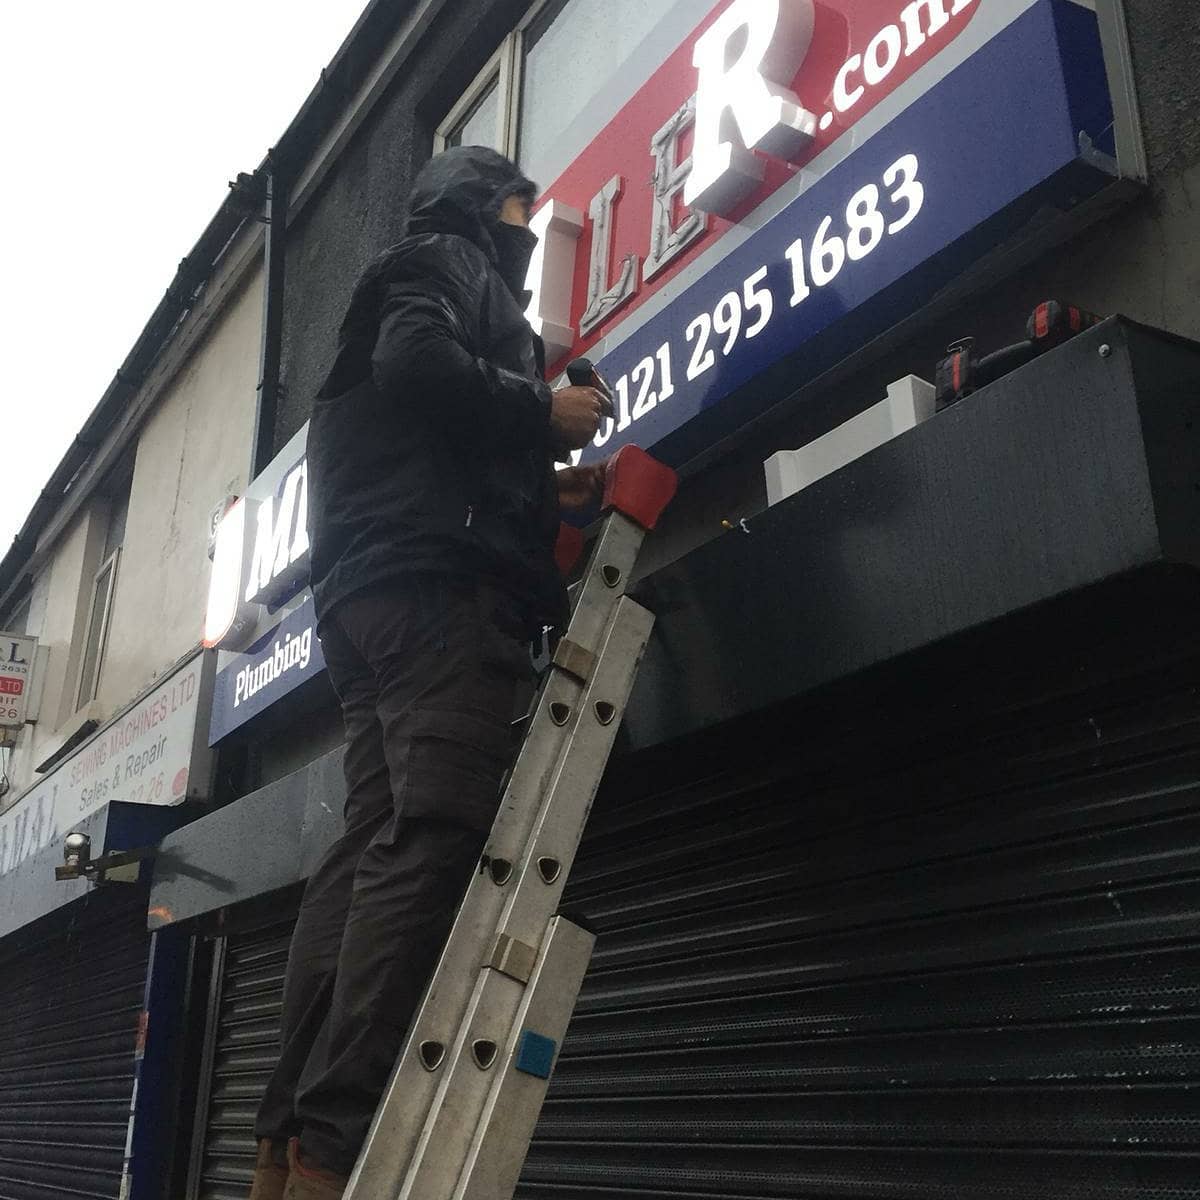 The making of the @meraboiler Birmingham sign.

To place an order If at all possible PLEASE whatsapp me on 07702153393